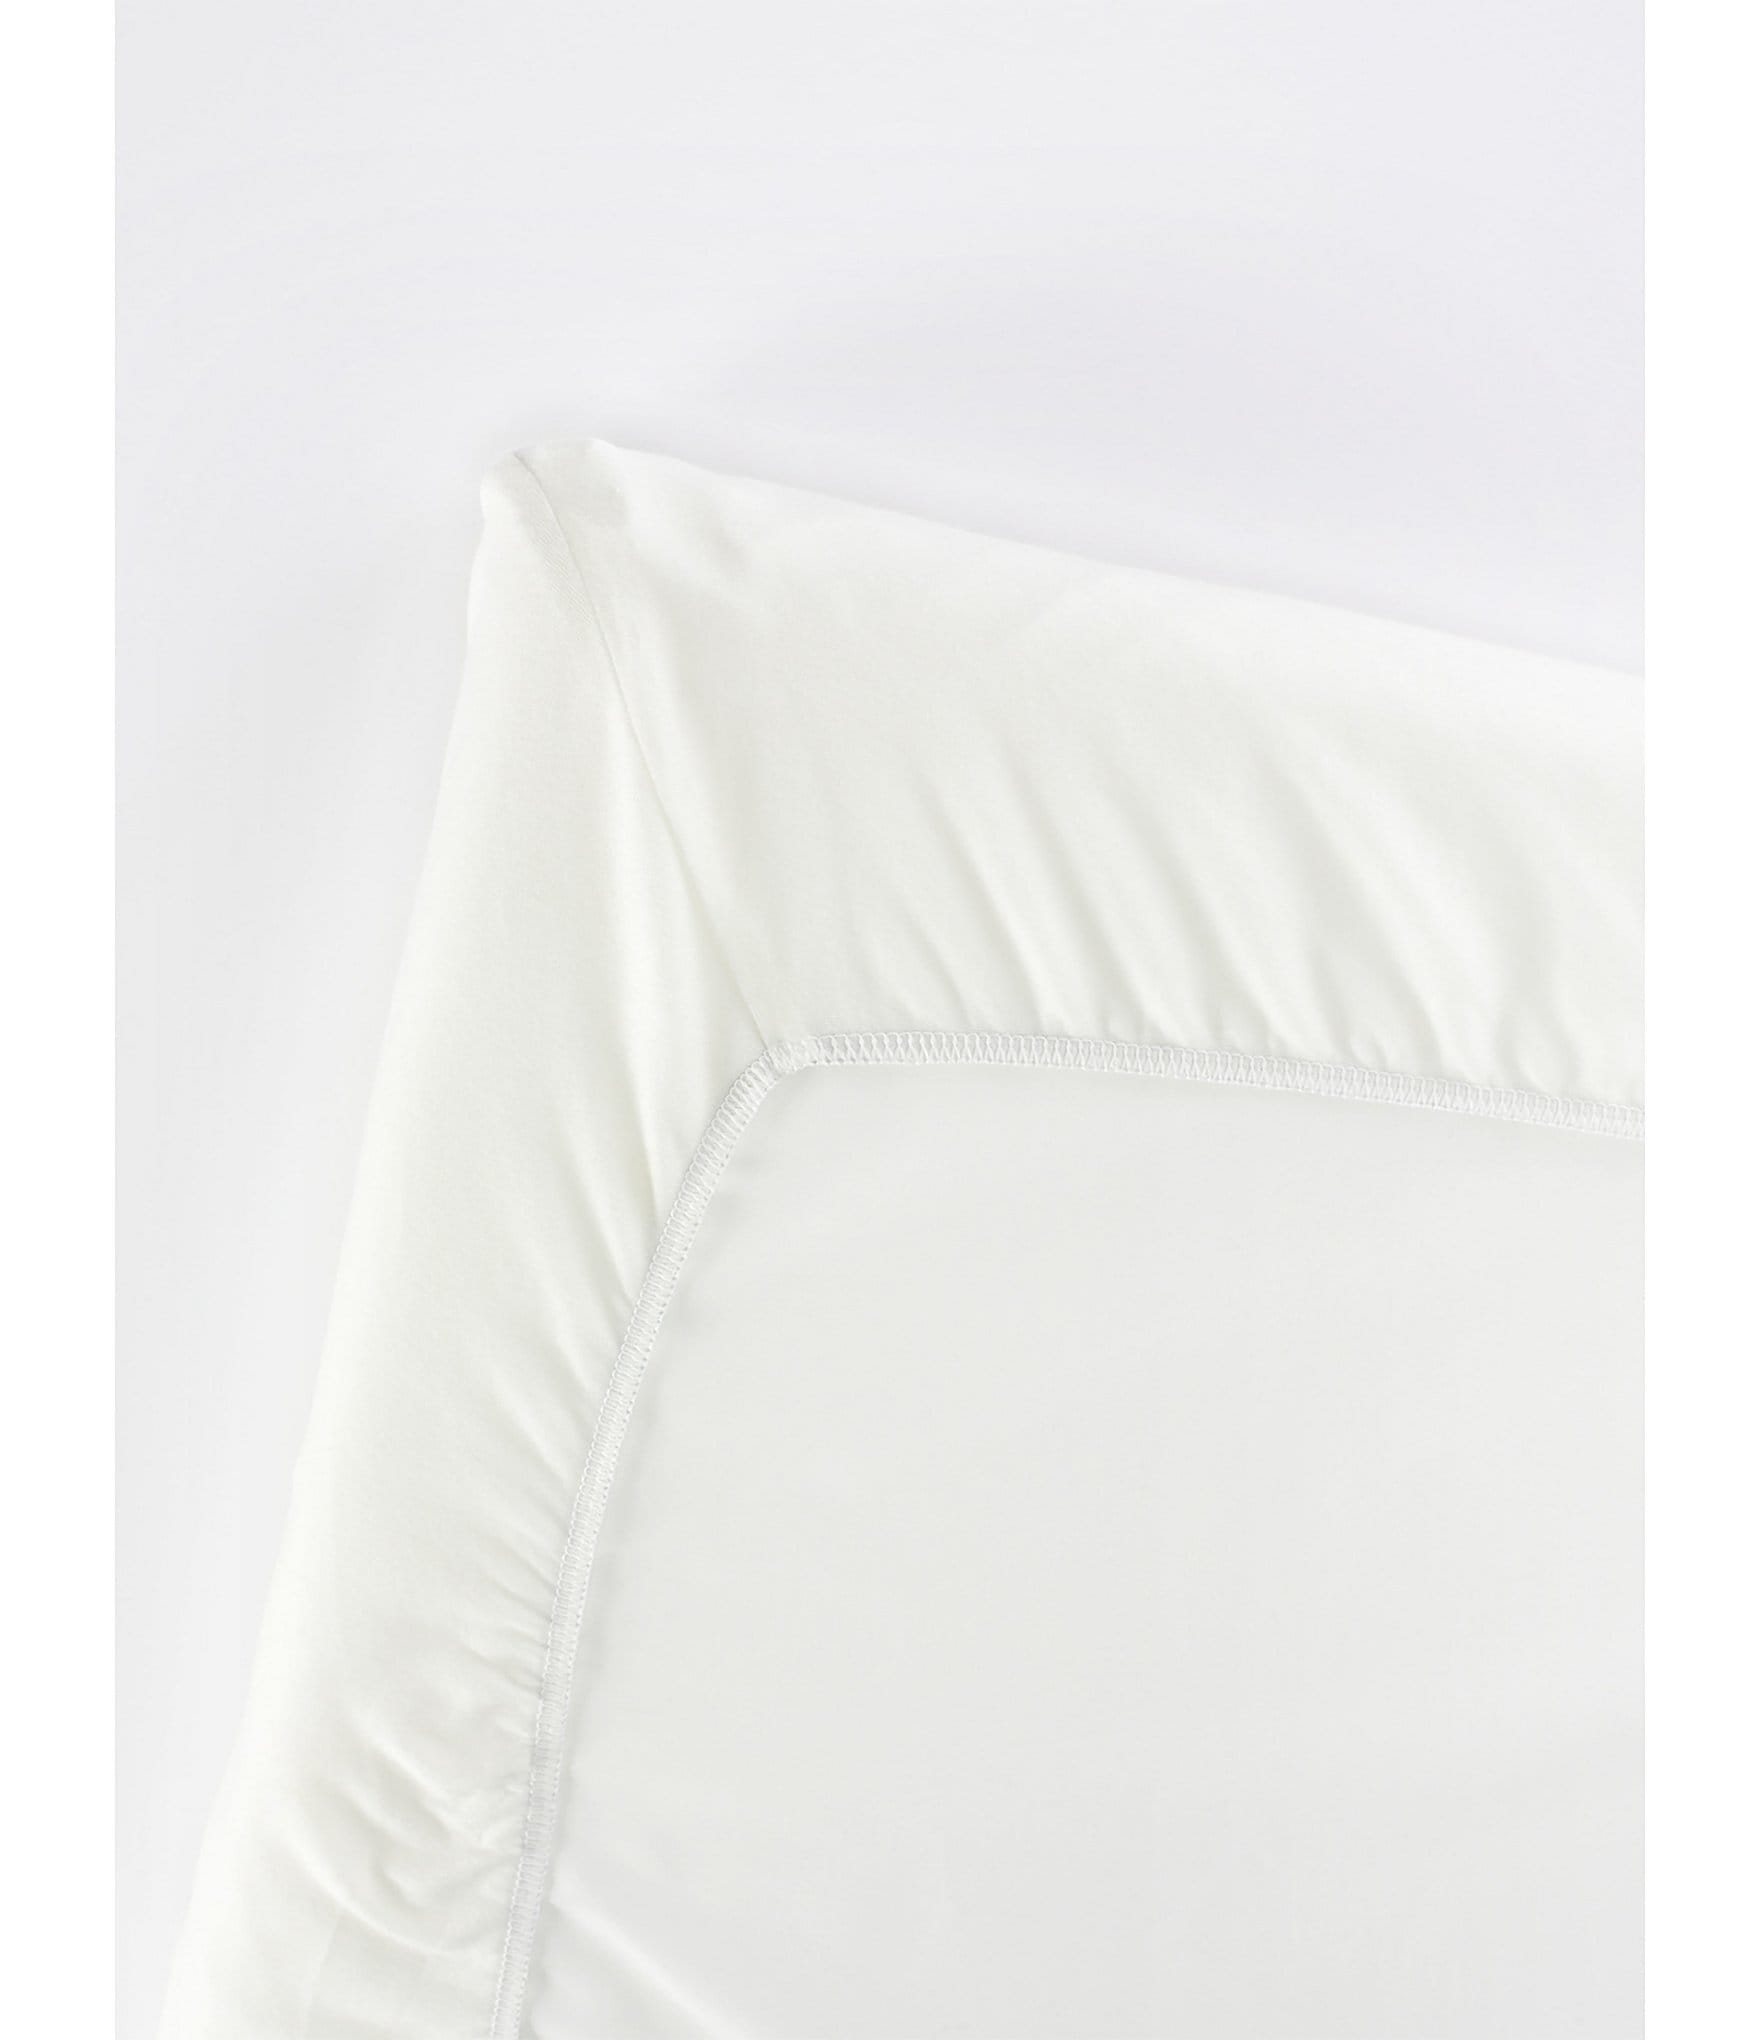 BABYBJRN Fitted Sheet for Travel Cot Light (Organic Natural White)